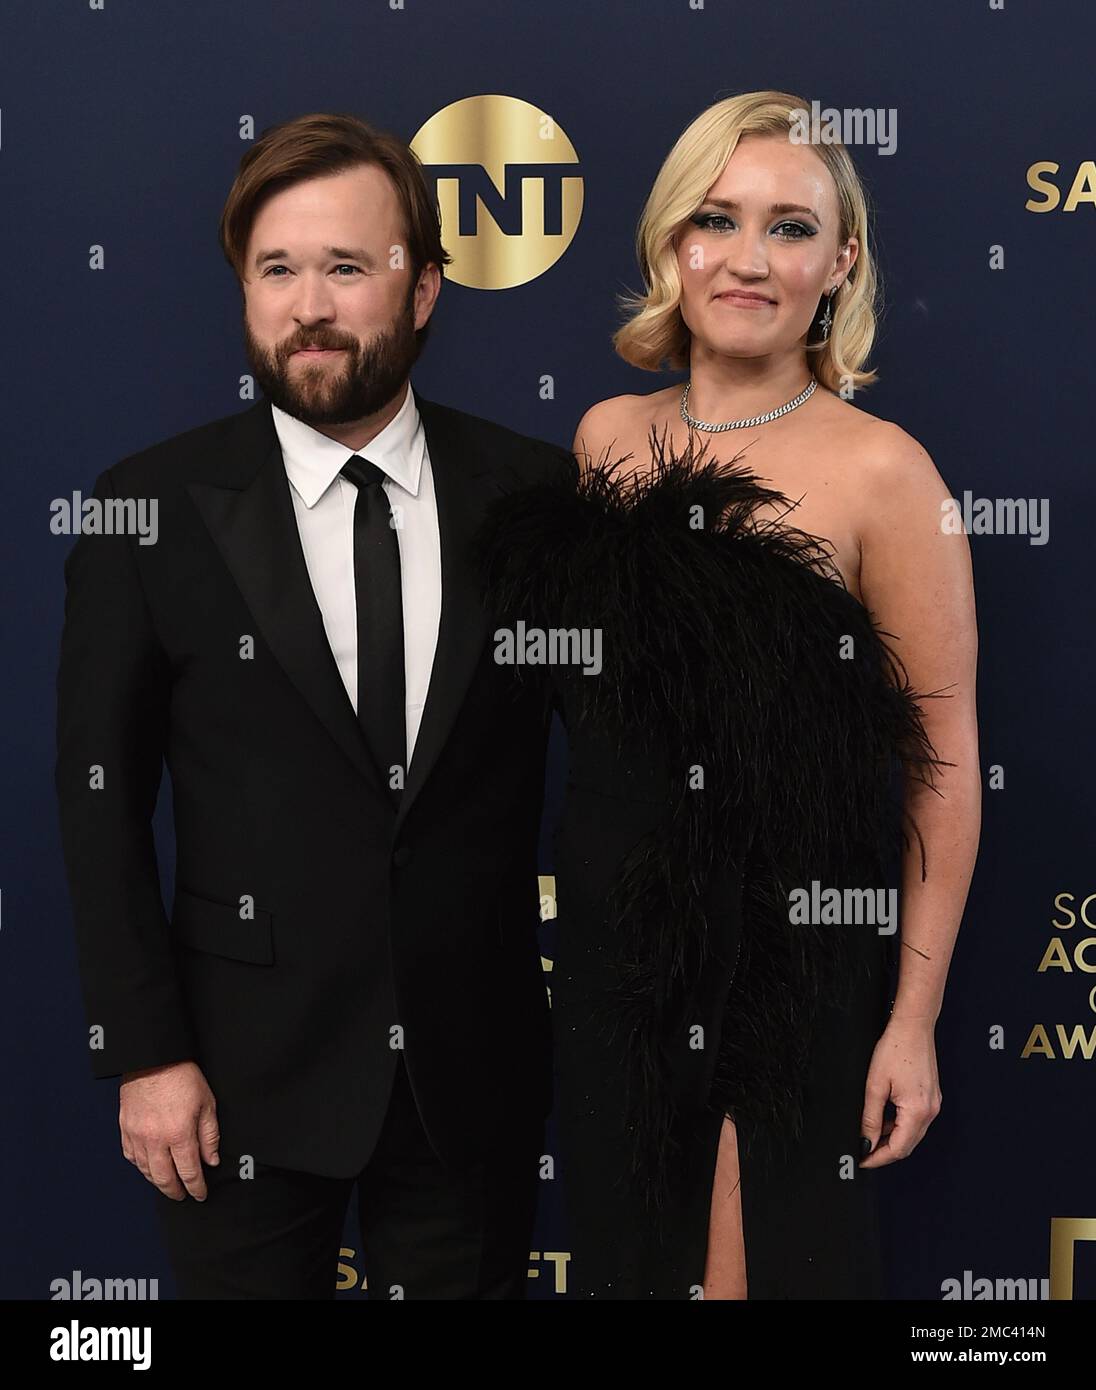 Haley Joel Osment, left, and Emily Osment arrives at the 28th annual Screen  Actors Guild Awards at the Barker Hangar on Sunday, Feb. 27, 2022, in Santa  Monica, Calif. (Photo by Jordan